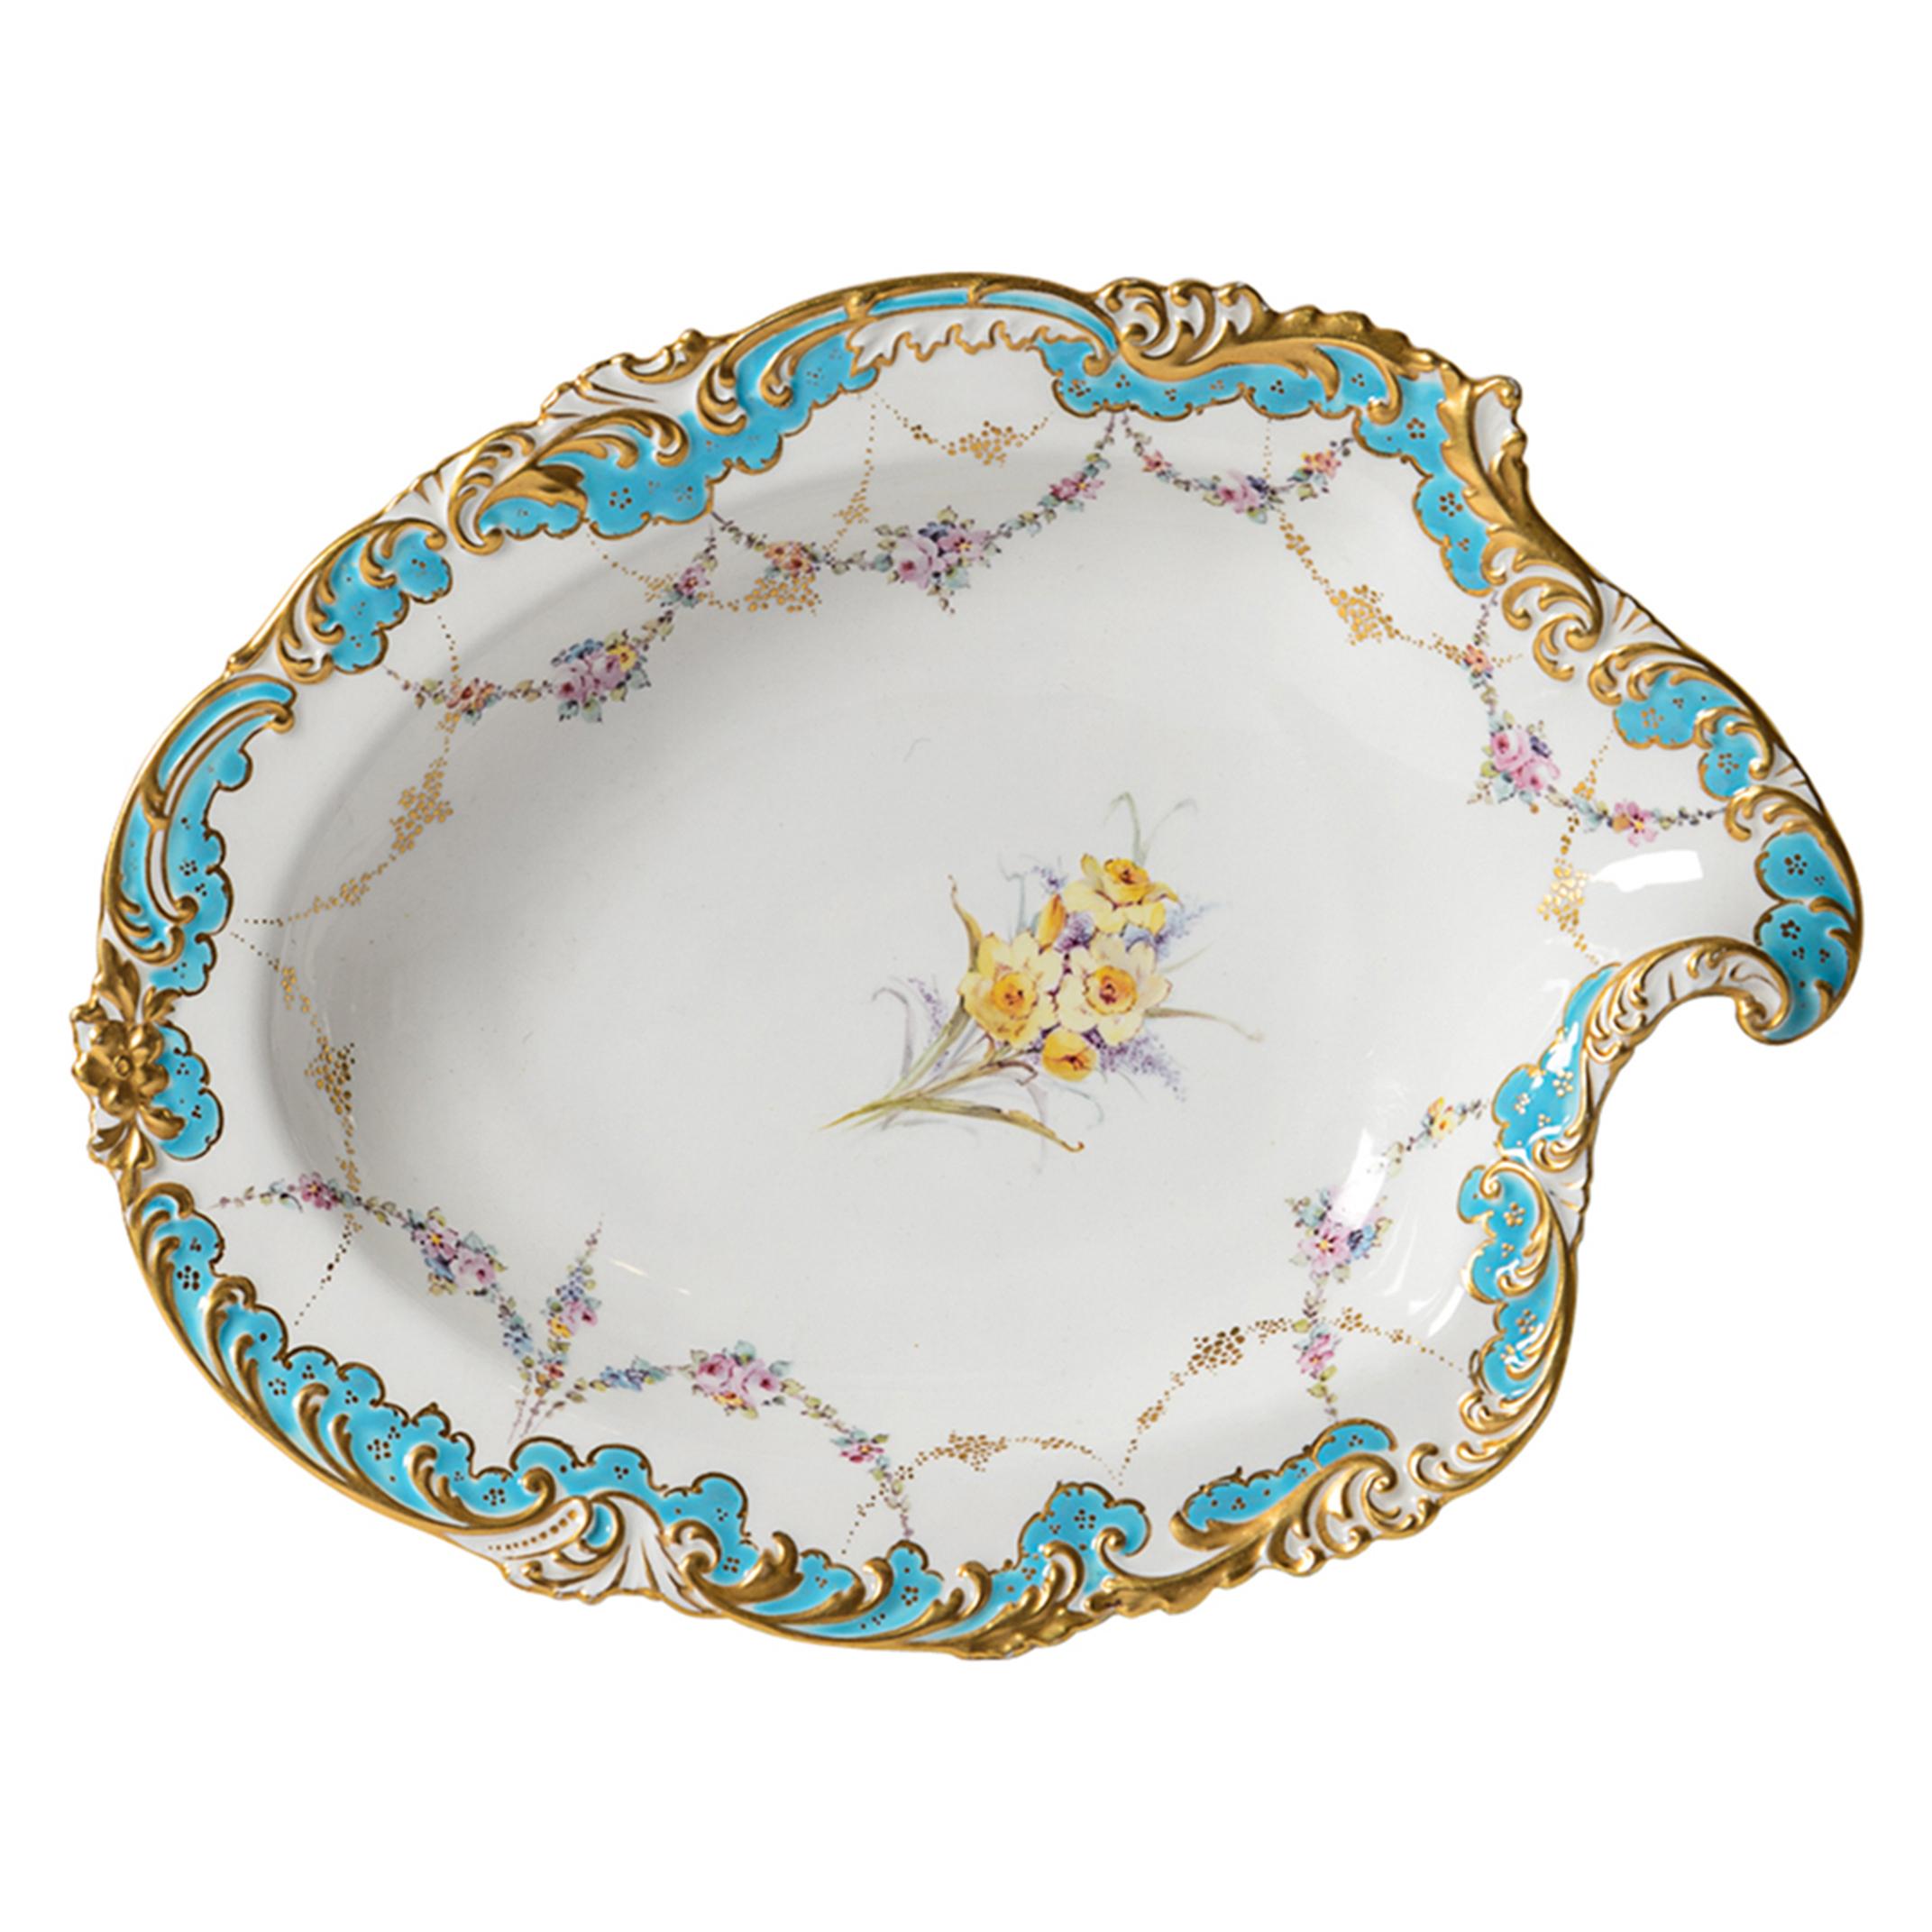 Antique Royal Crown Derby Pastry or Serving Dish, Turquoise & Gilt circa 1895 For Sale 1